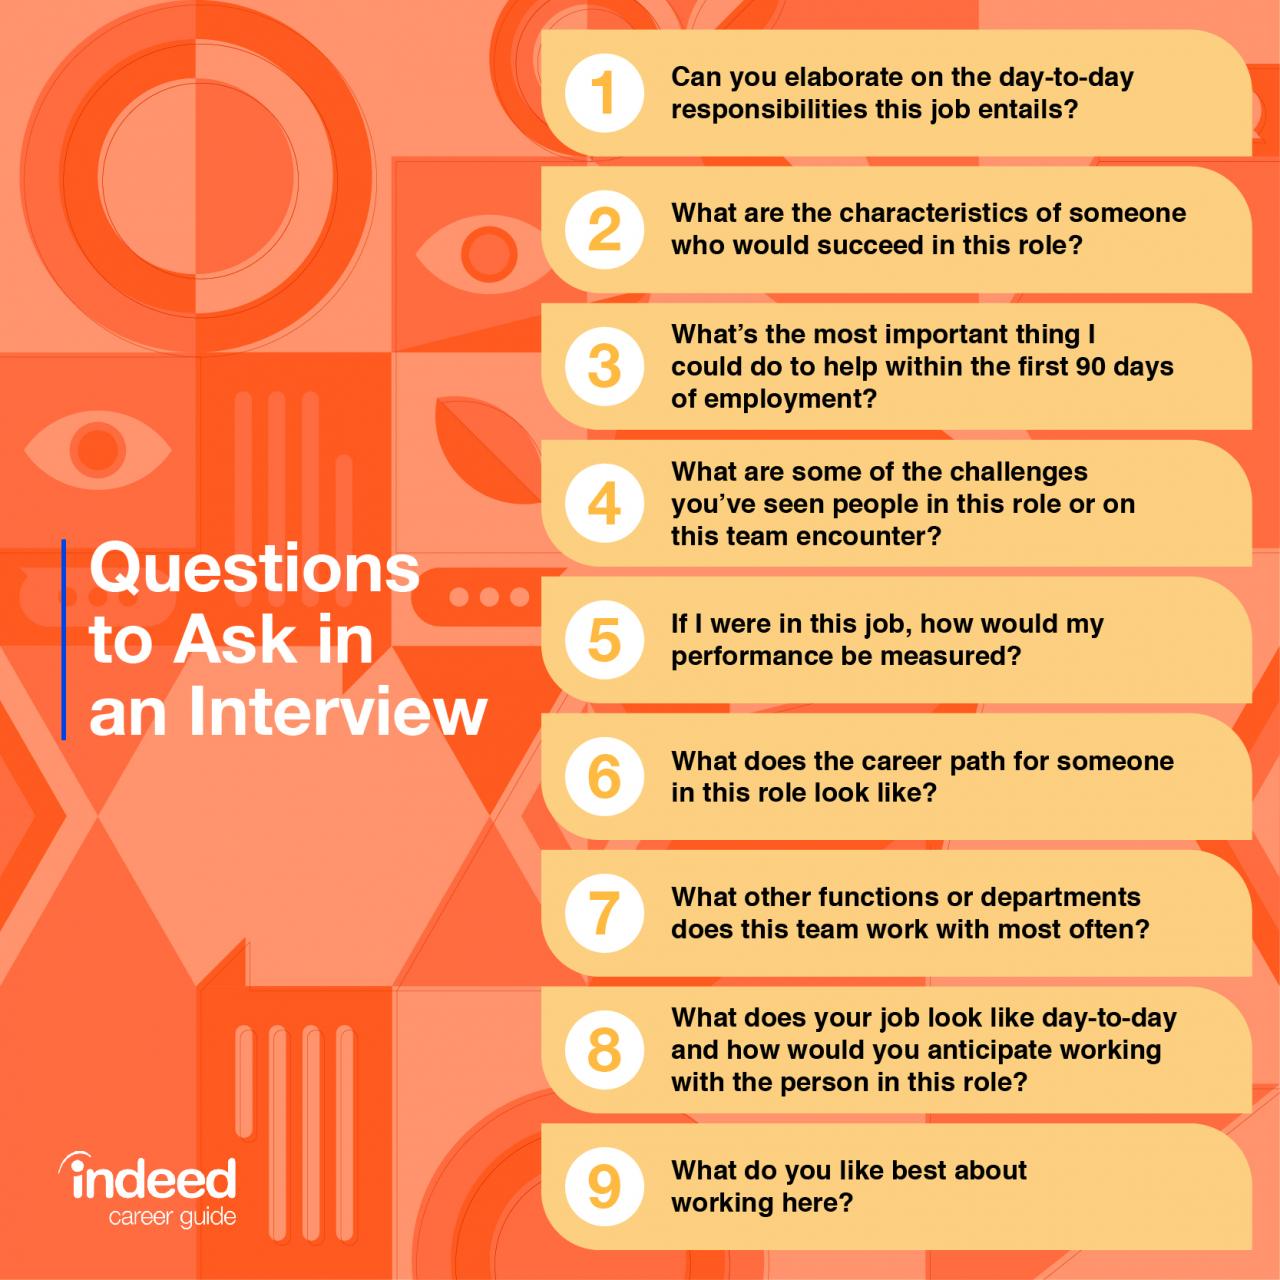 Great questions to ask in an interview as a candidate